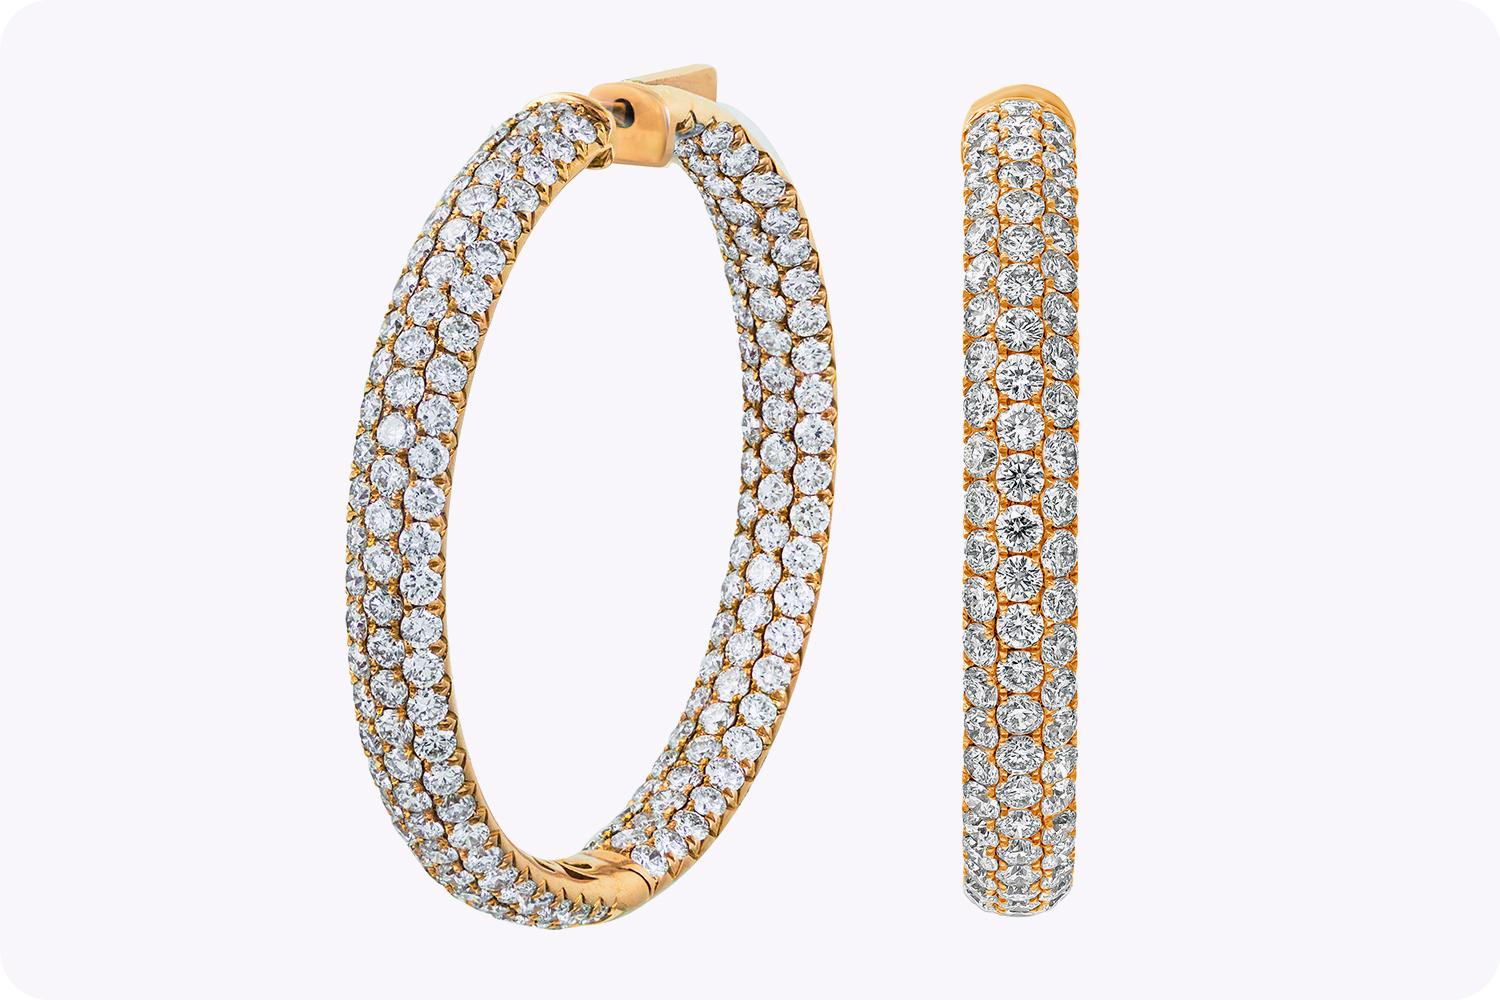 A classic hoop earrings showcasing pave set round diamonds in the inside and outside weighing 9.55 carats total. Made in 18k Rose Gold.

Roman Malakov is a custom house, specializing in creating anything you can imagine. If you would like to receive